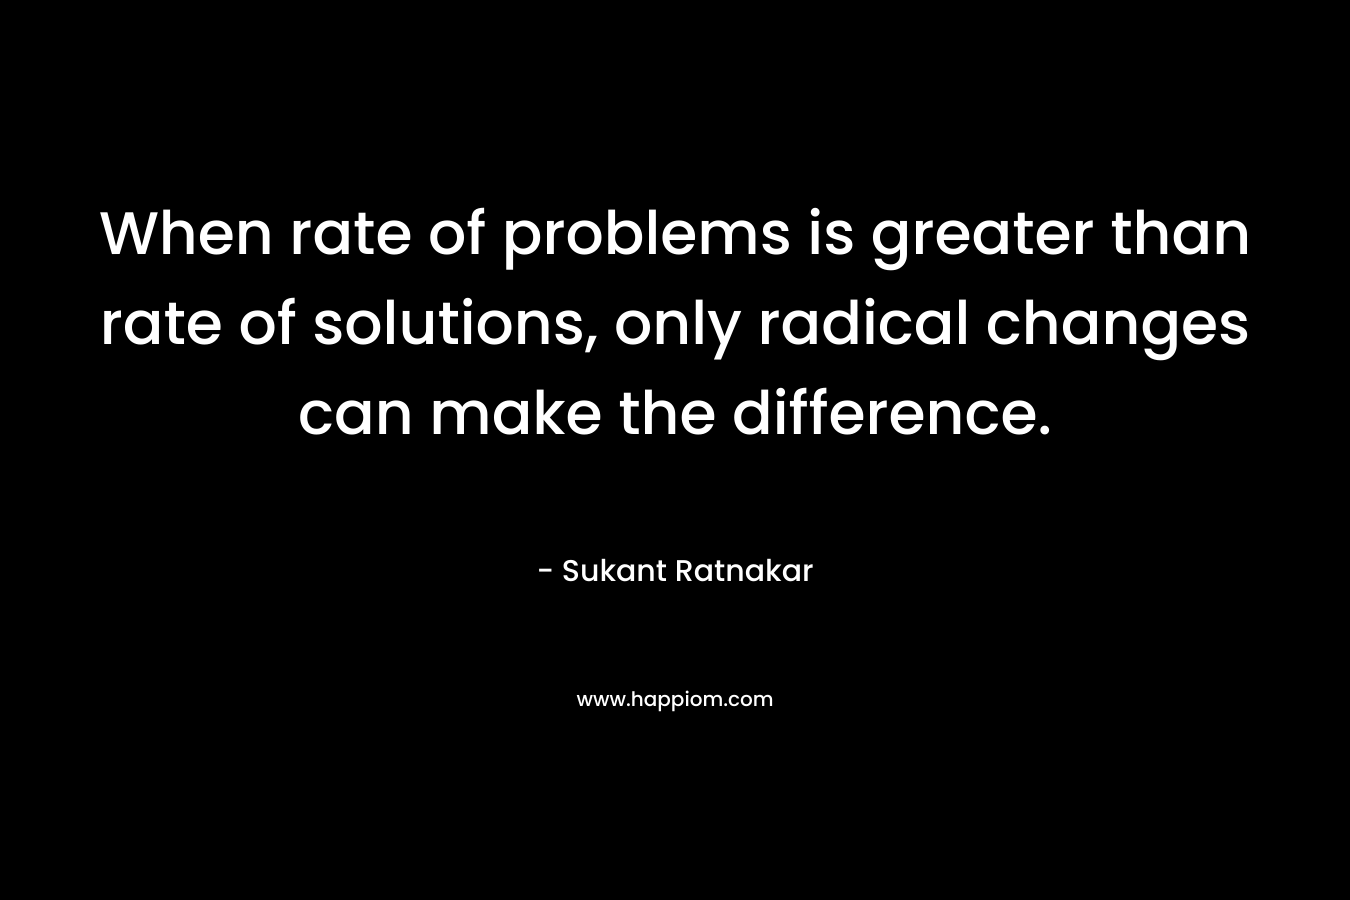 When rate of problems is greater than rate of solutions, only radical changes can make the difference. – Sukant Ratnakar